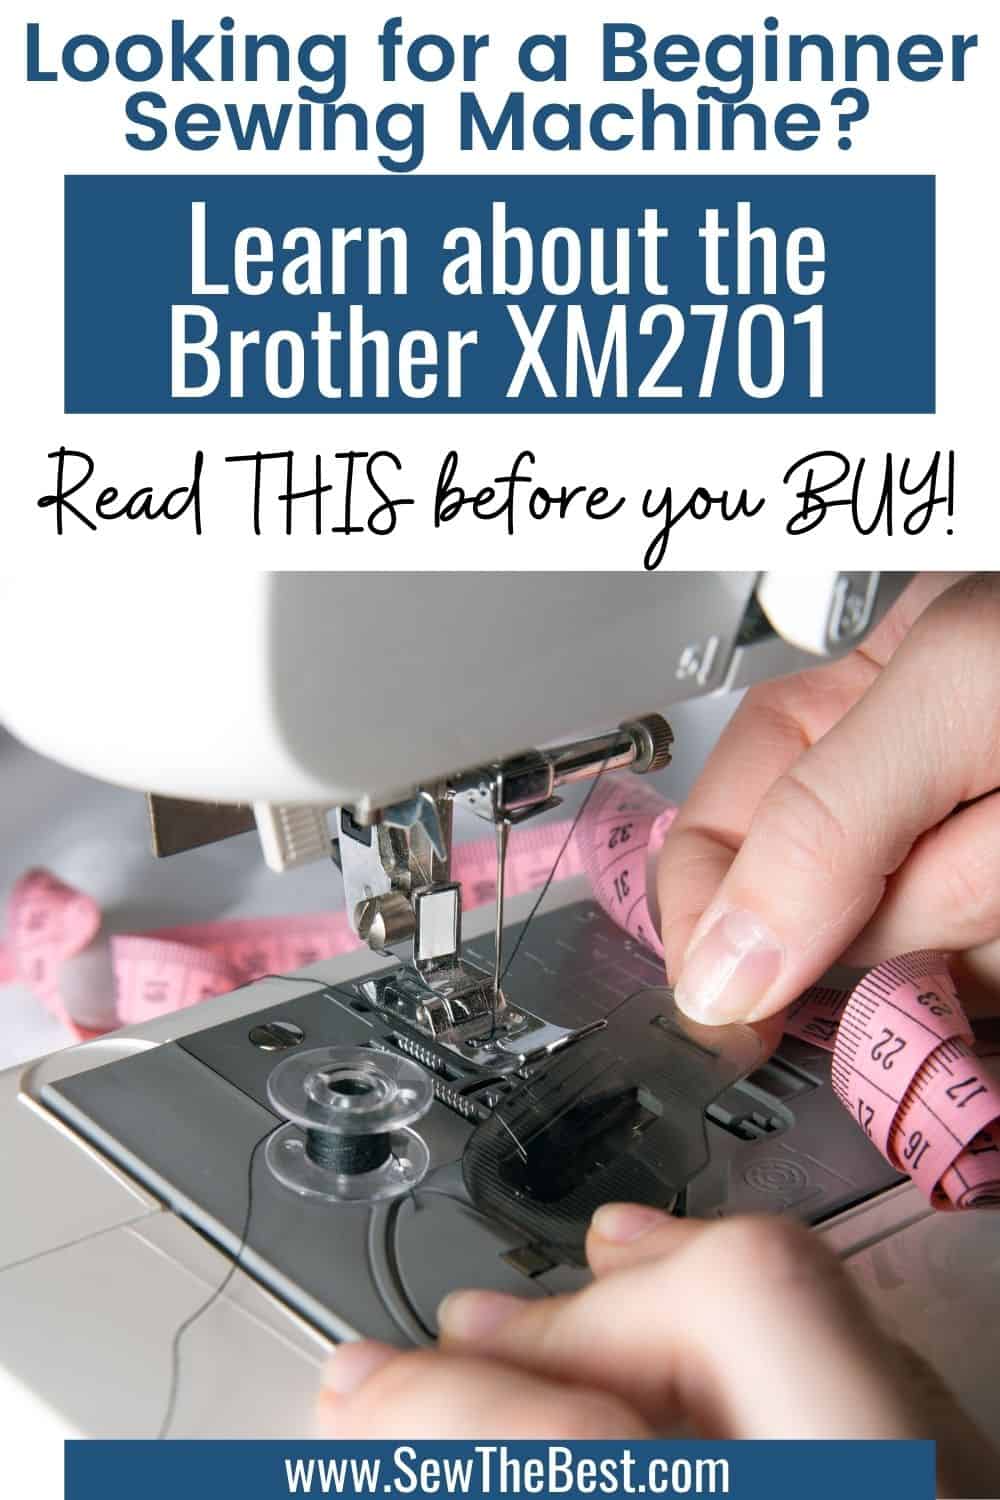 Looking for a good beginner sewing machine? Learn about the Brother XM2701. Read this Brother XM2701 sewing machine review before you buy a beginner sewing machine. #AD #Sewing #SewingMachine